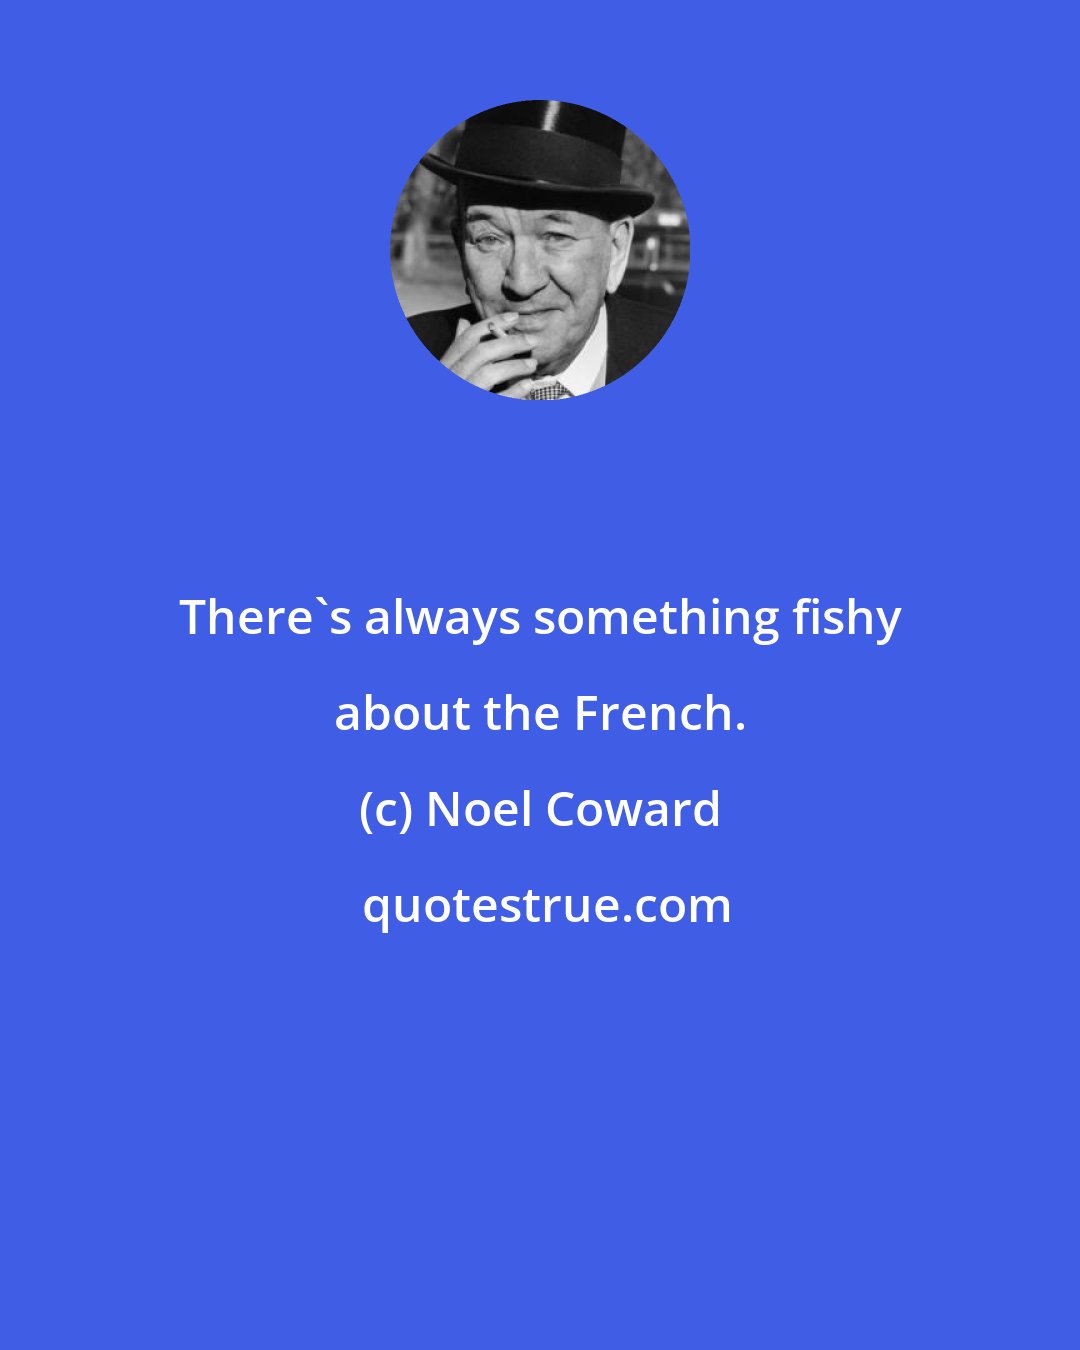 Noel Coward: There's always something fishy about the French.